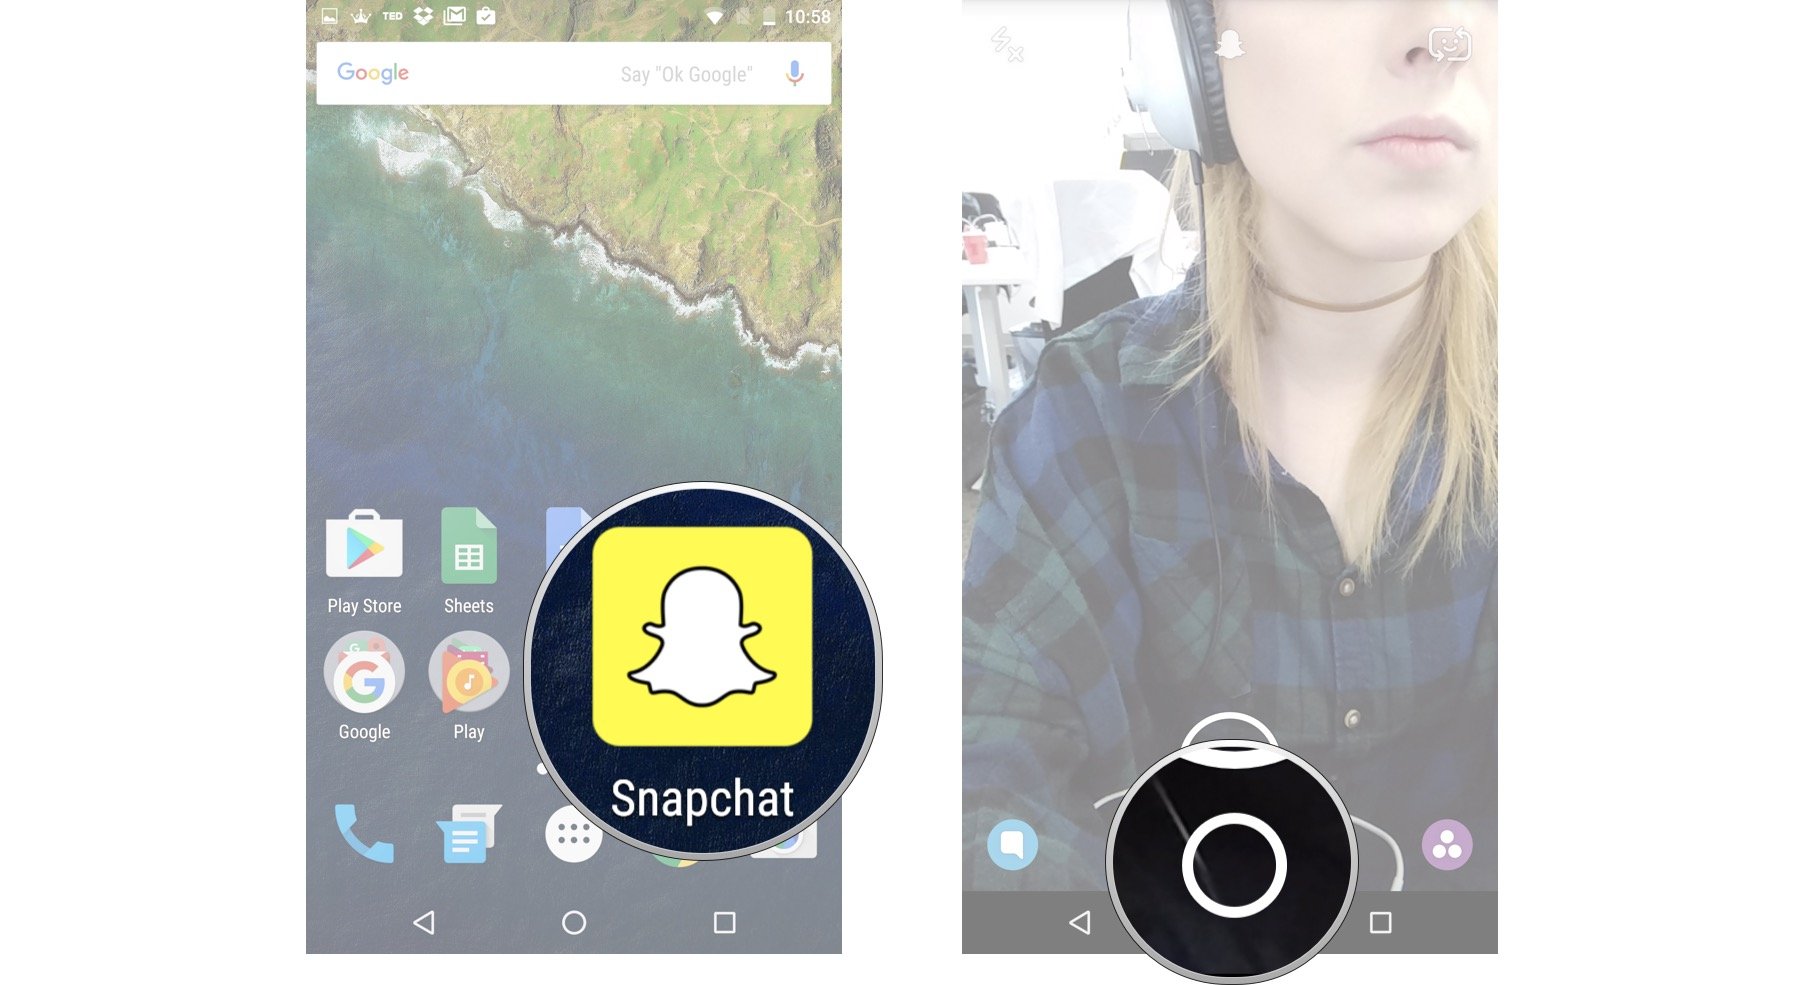 Launch Snapchat from your home screen and tap the smaller white circle below the shutter button to access Memories. Tap the Snaps tab to access your saved content.